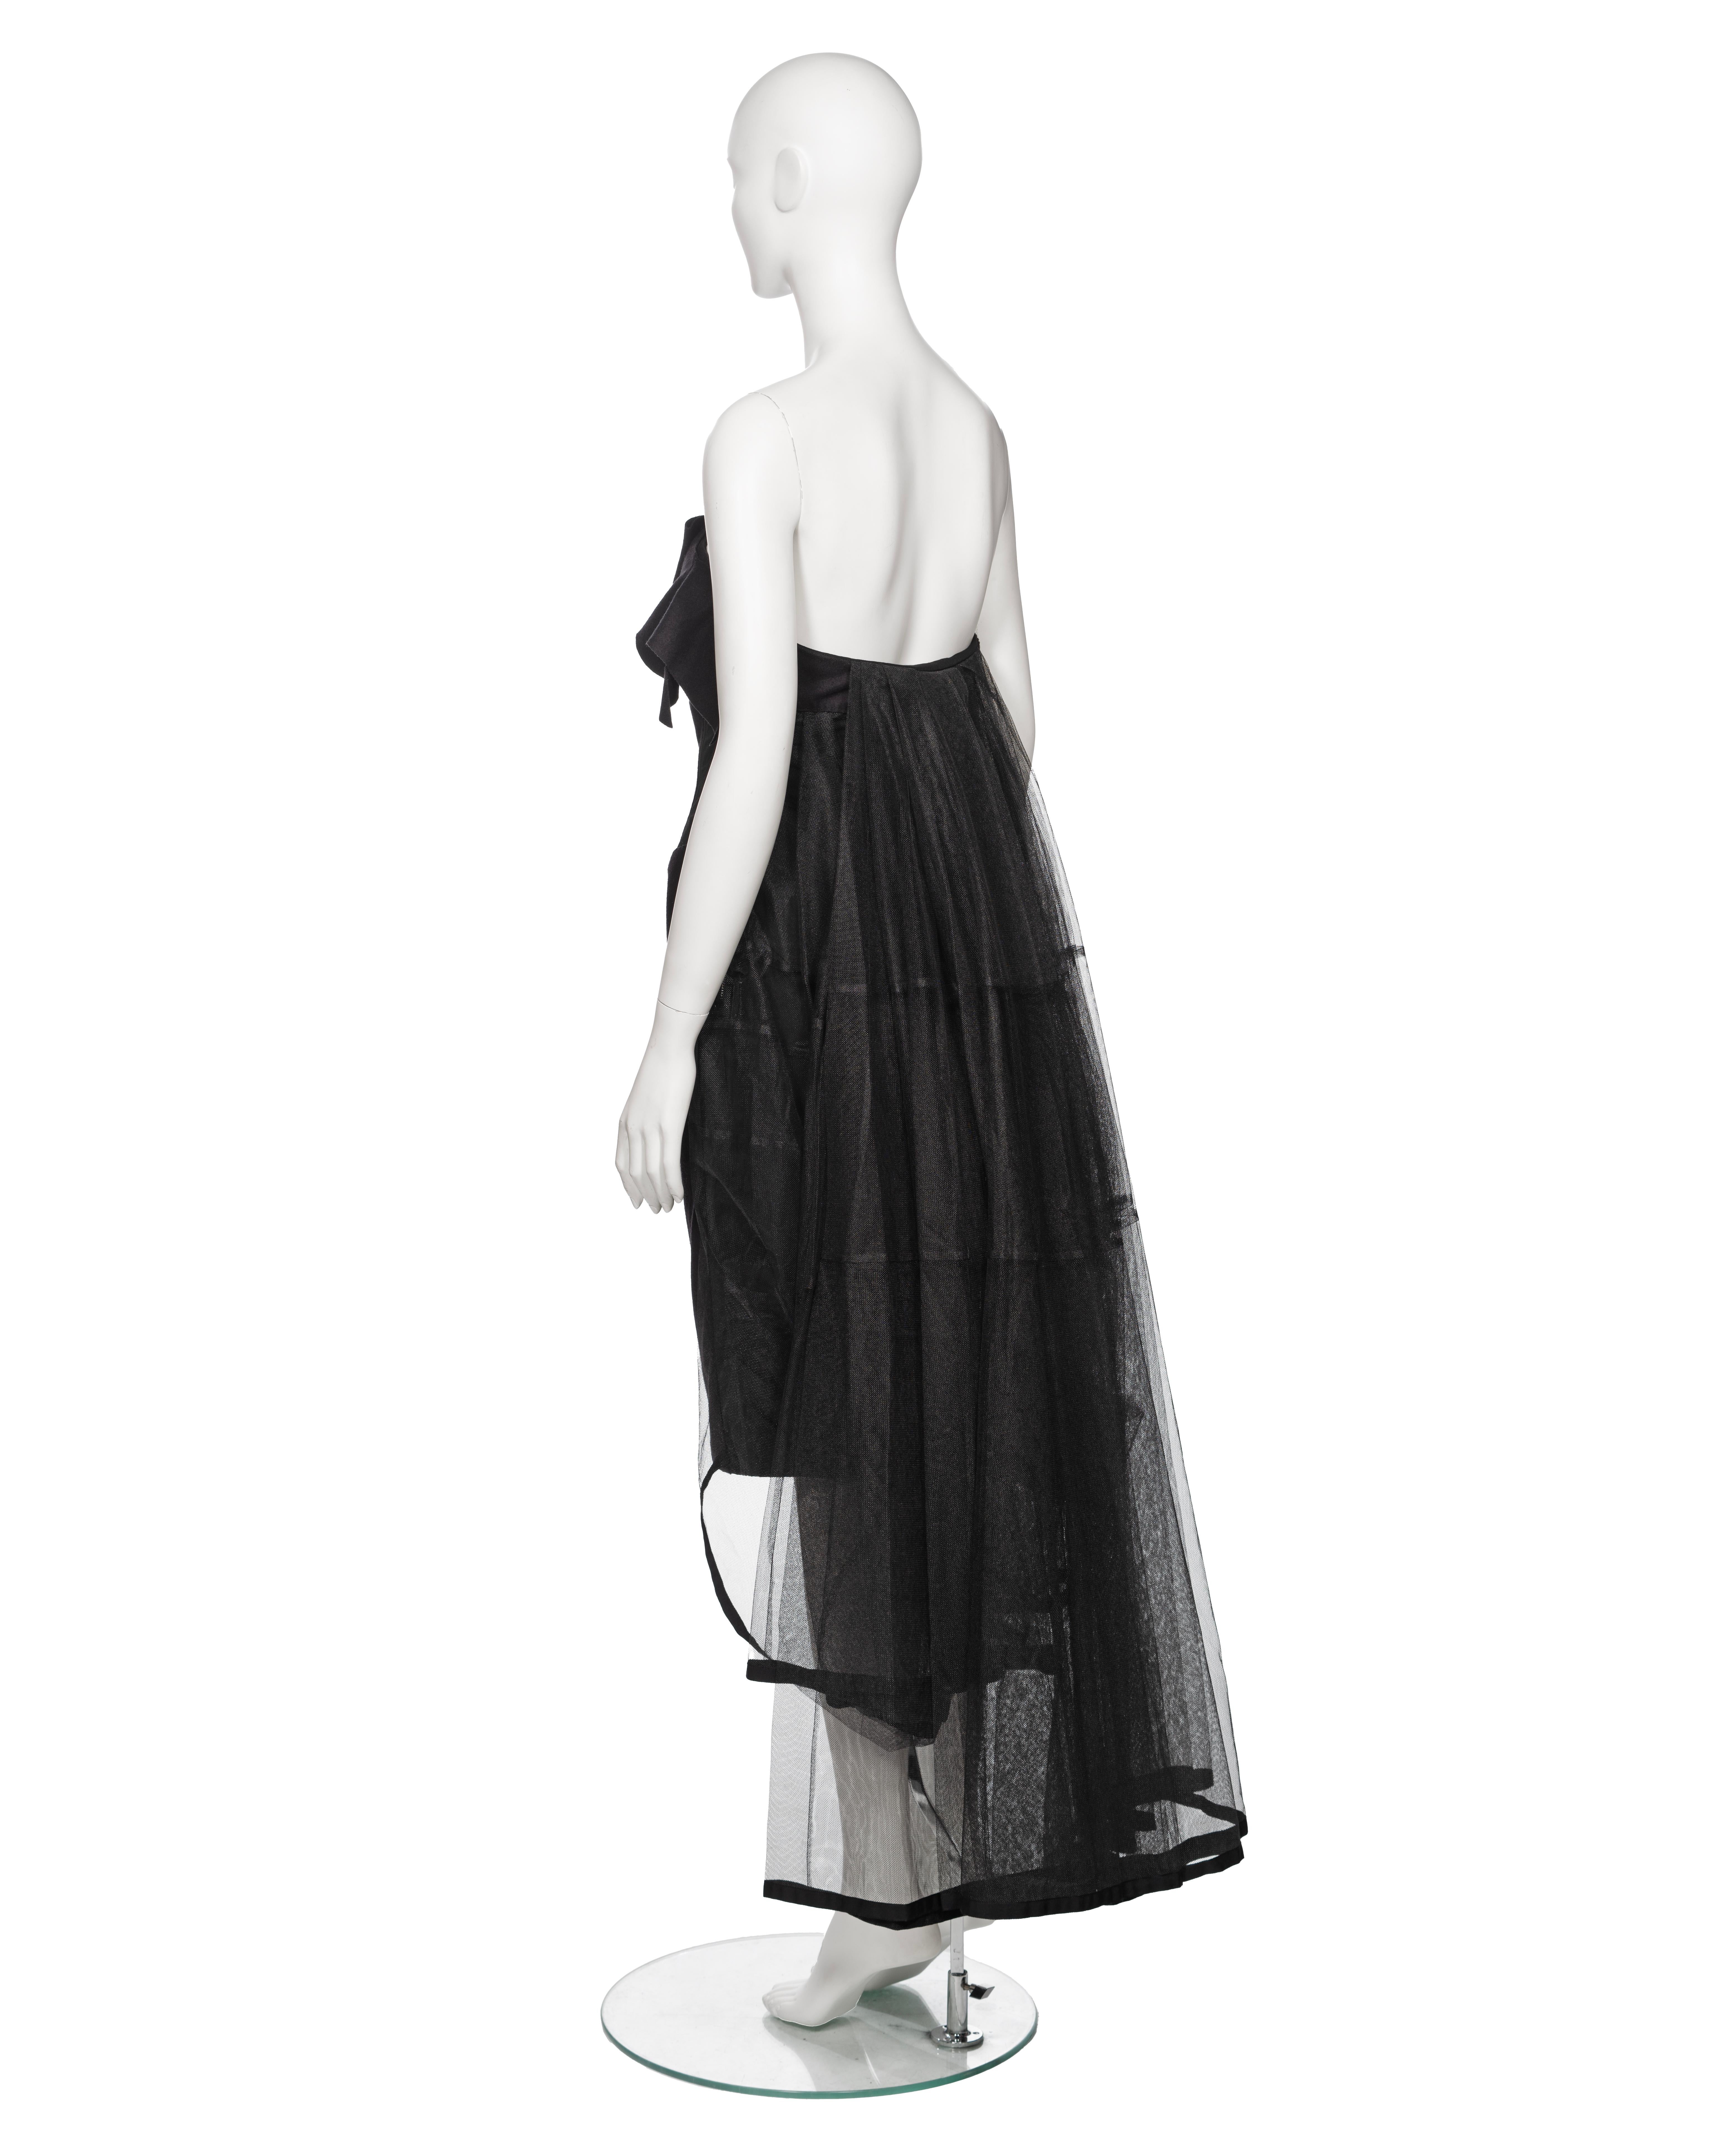 Louis Vuitton by Marc Jacobs Black Wool Strapless Dress with Petticoat, fw 2008 For Sale 6